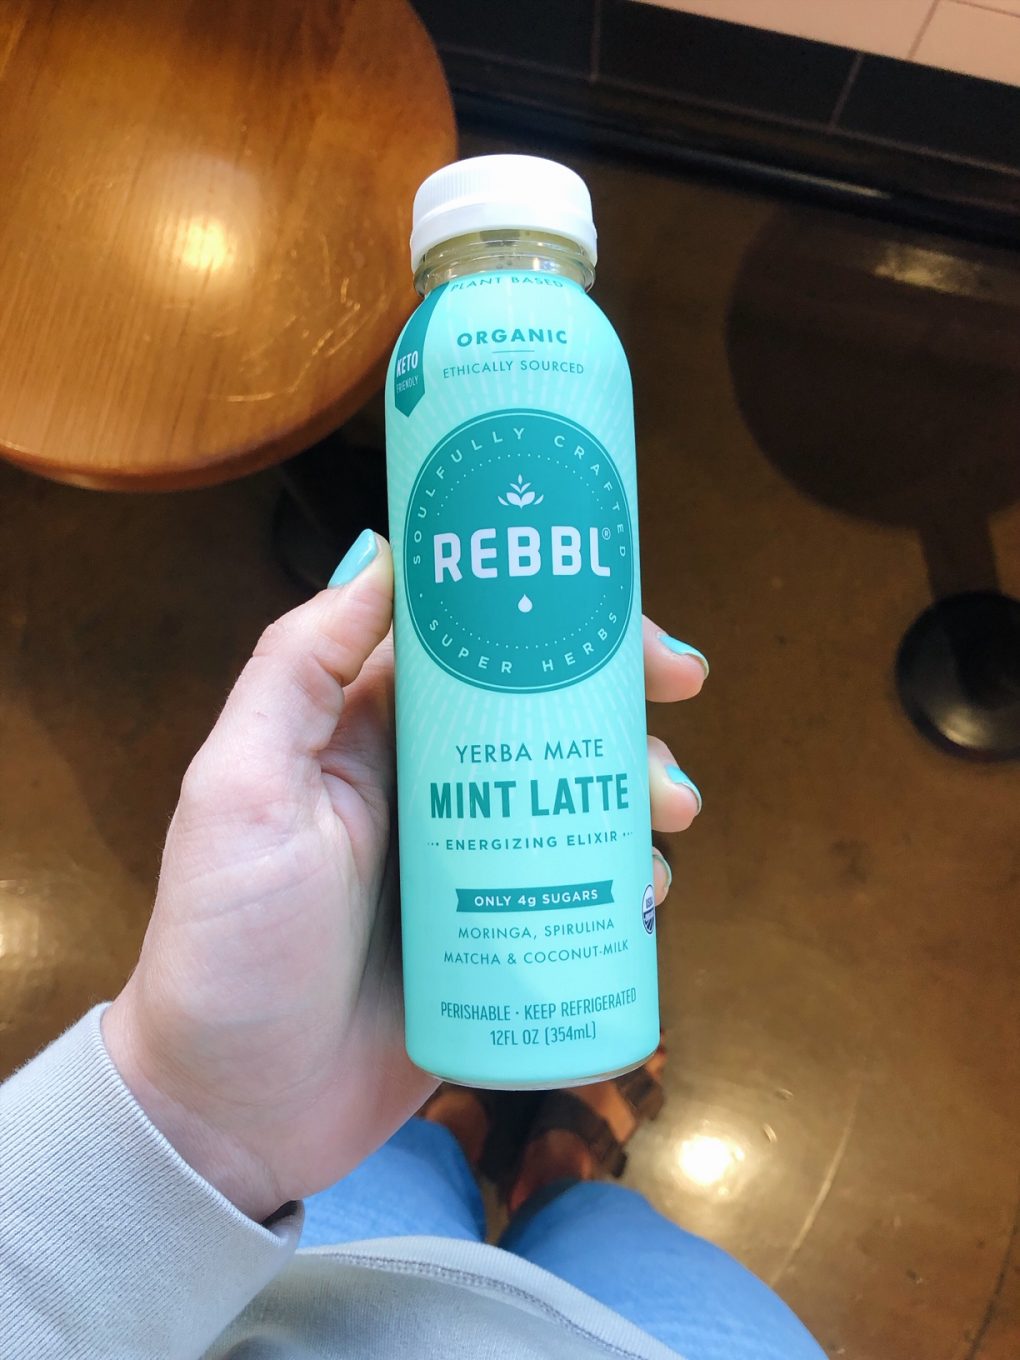 Holding a Chocolate mint Rebbl drink in the grocery store